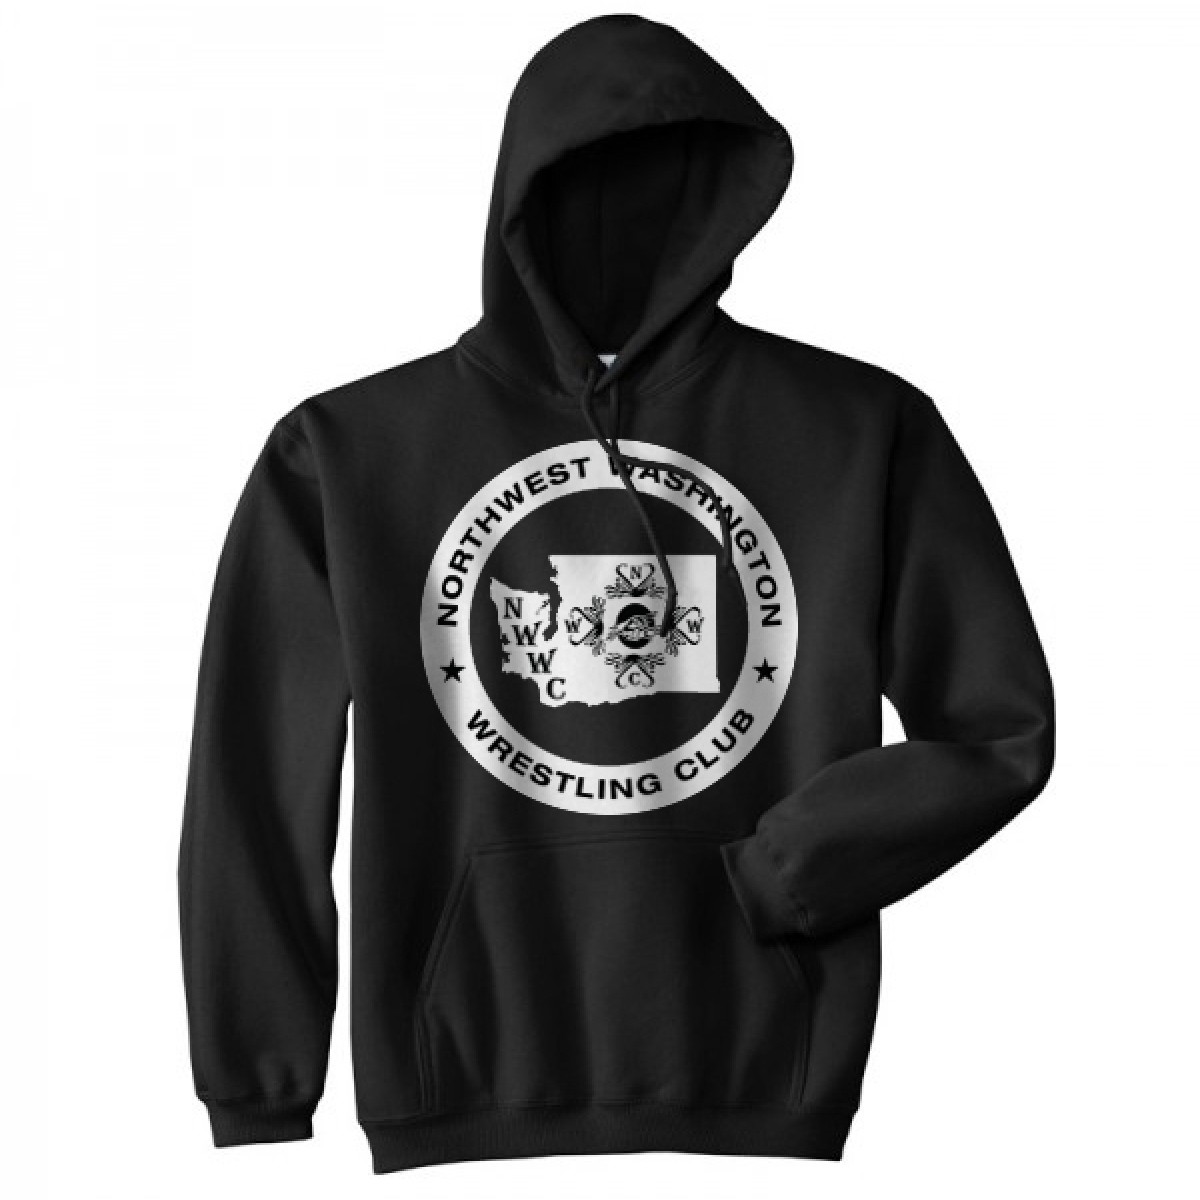 NWWC black hoodie with the logo in white